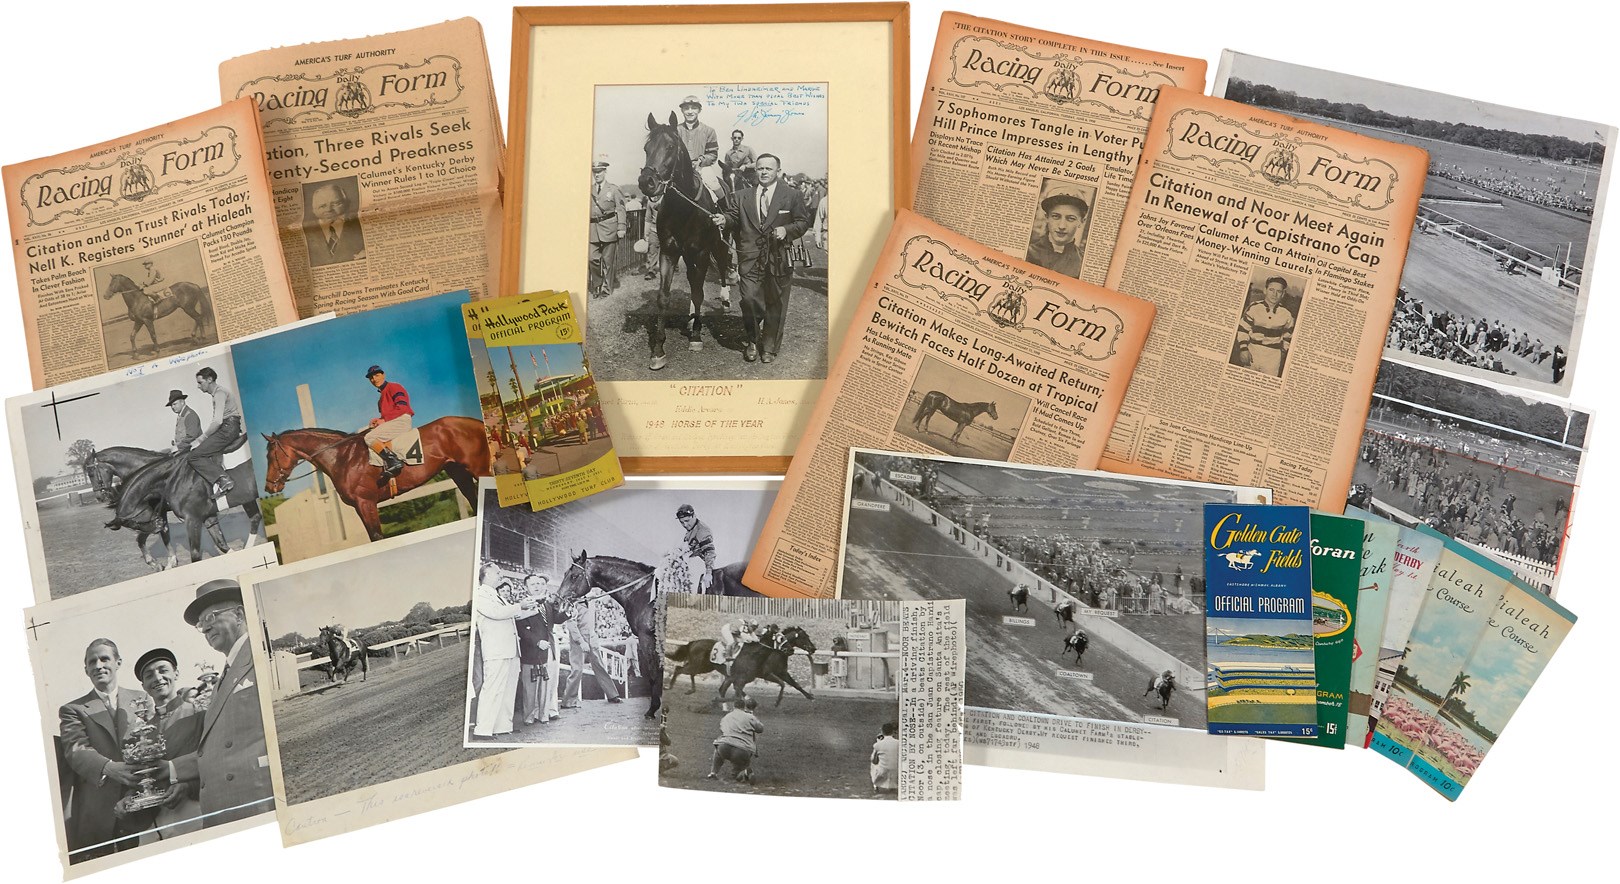 Horse Racing - Awesome Triple Crown Winner Collection (21)